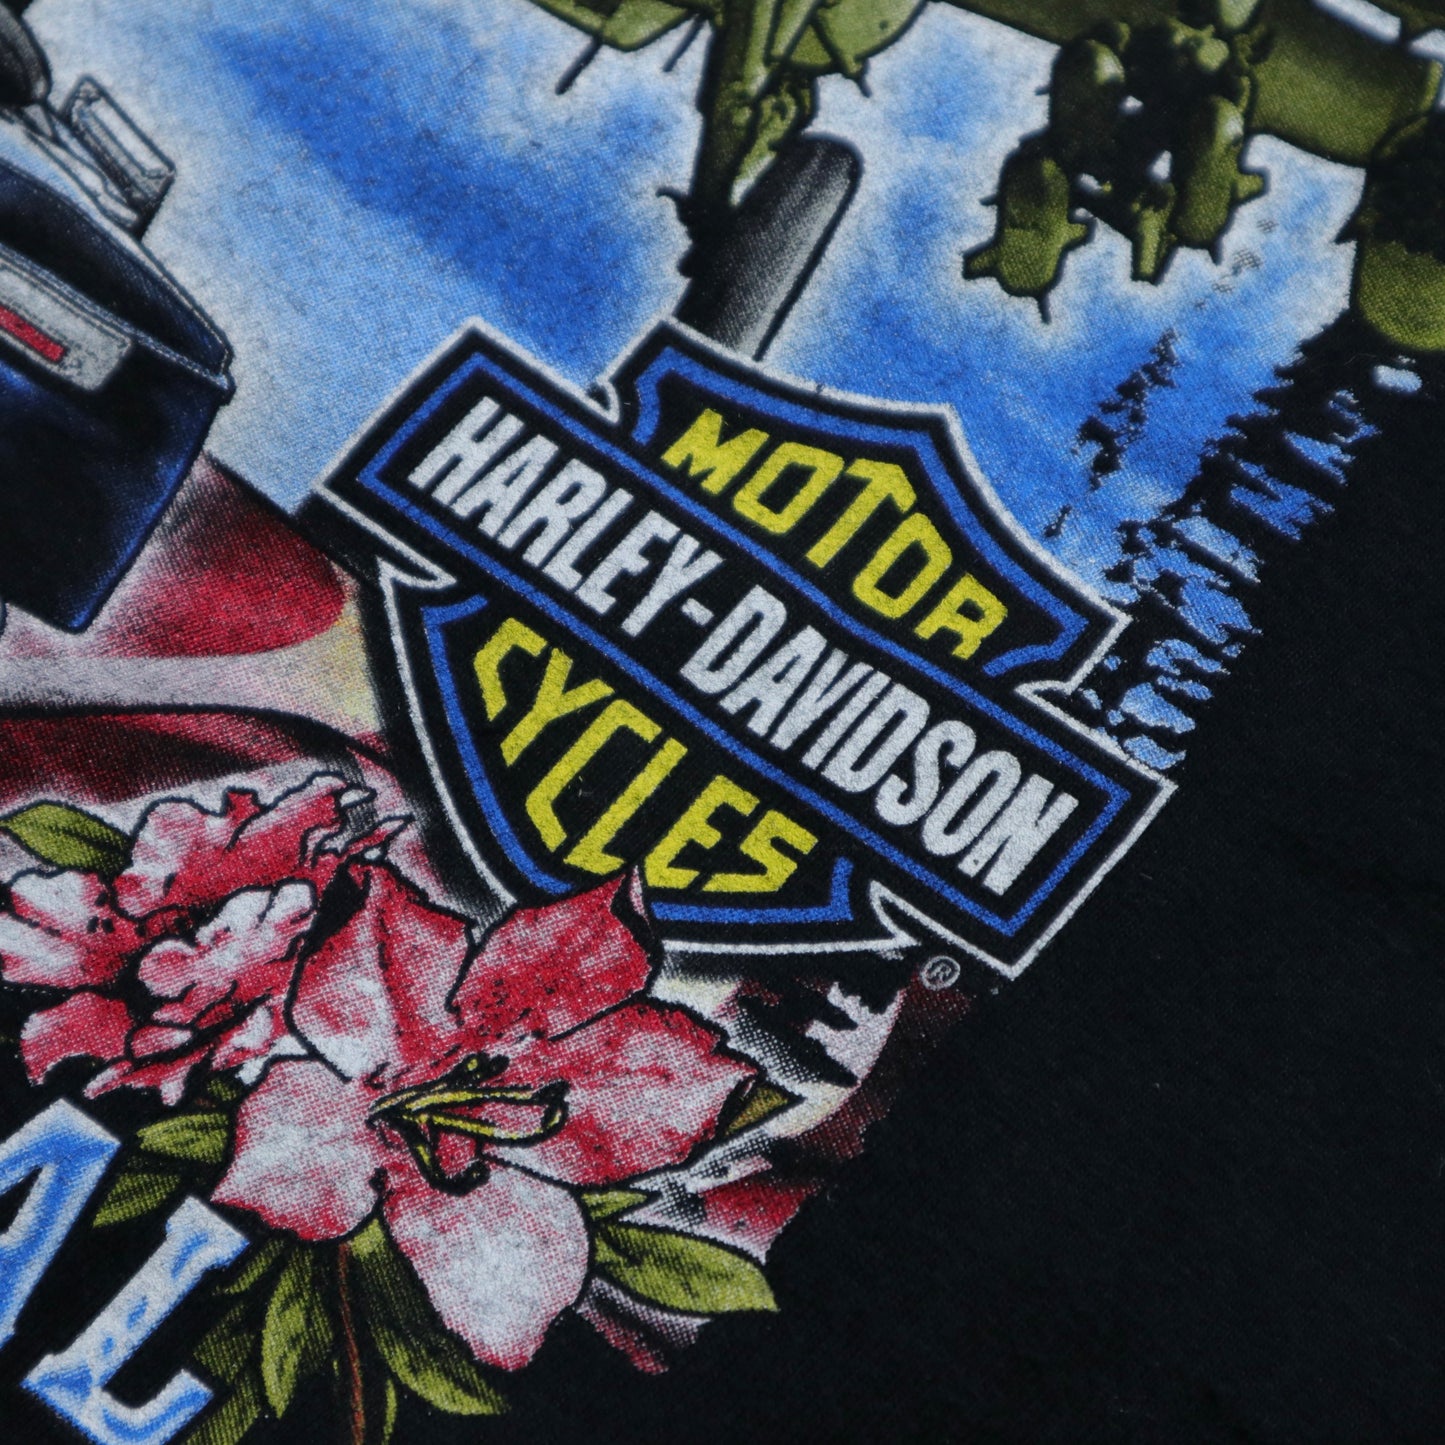 00s American-made Harley-Davidson helicopter and heavy aircraft totem tee